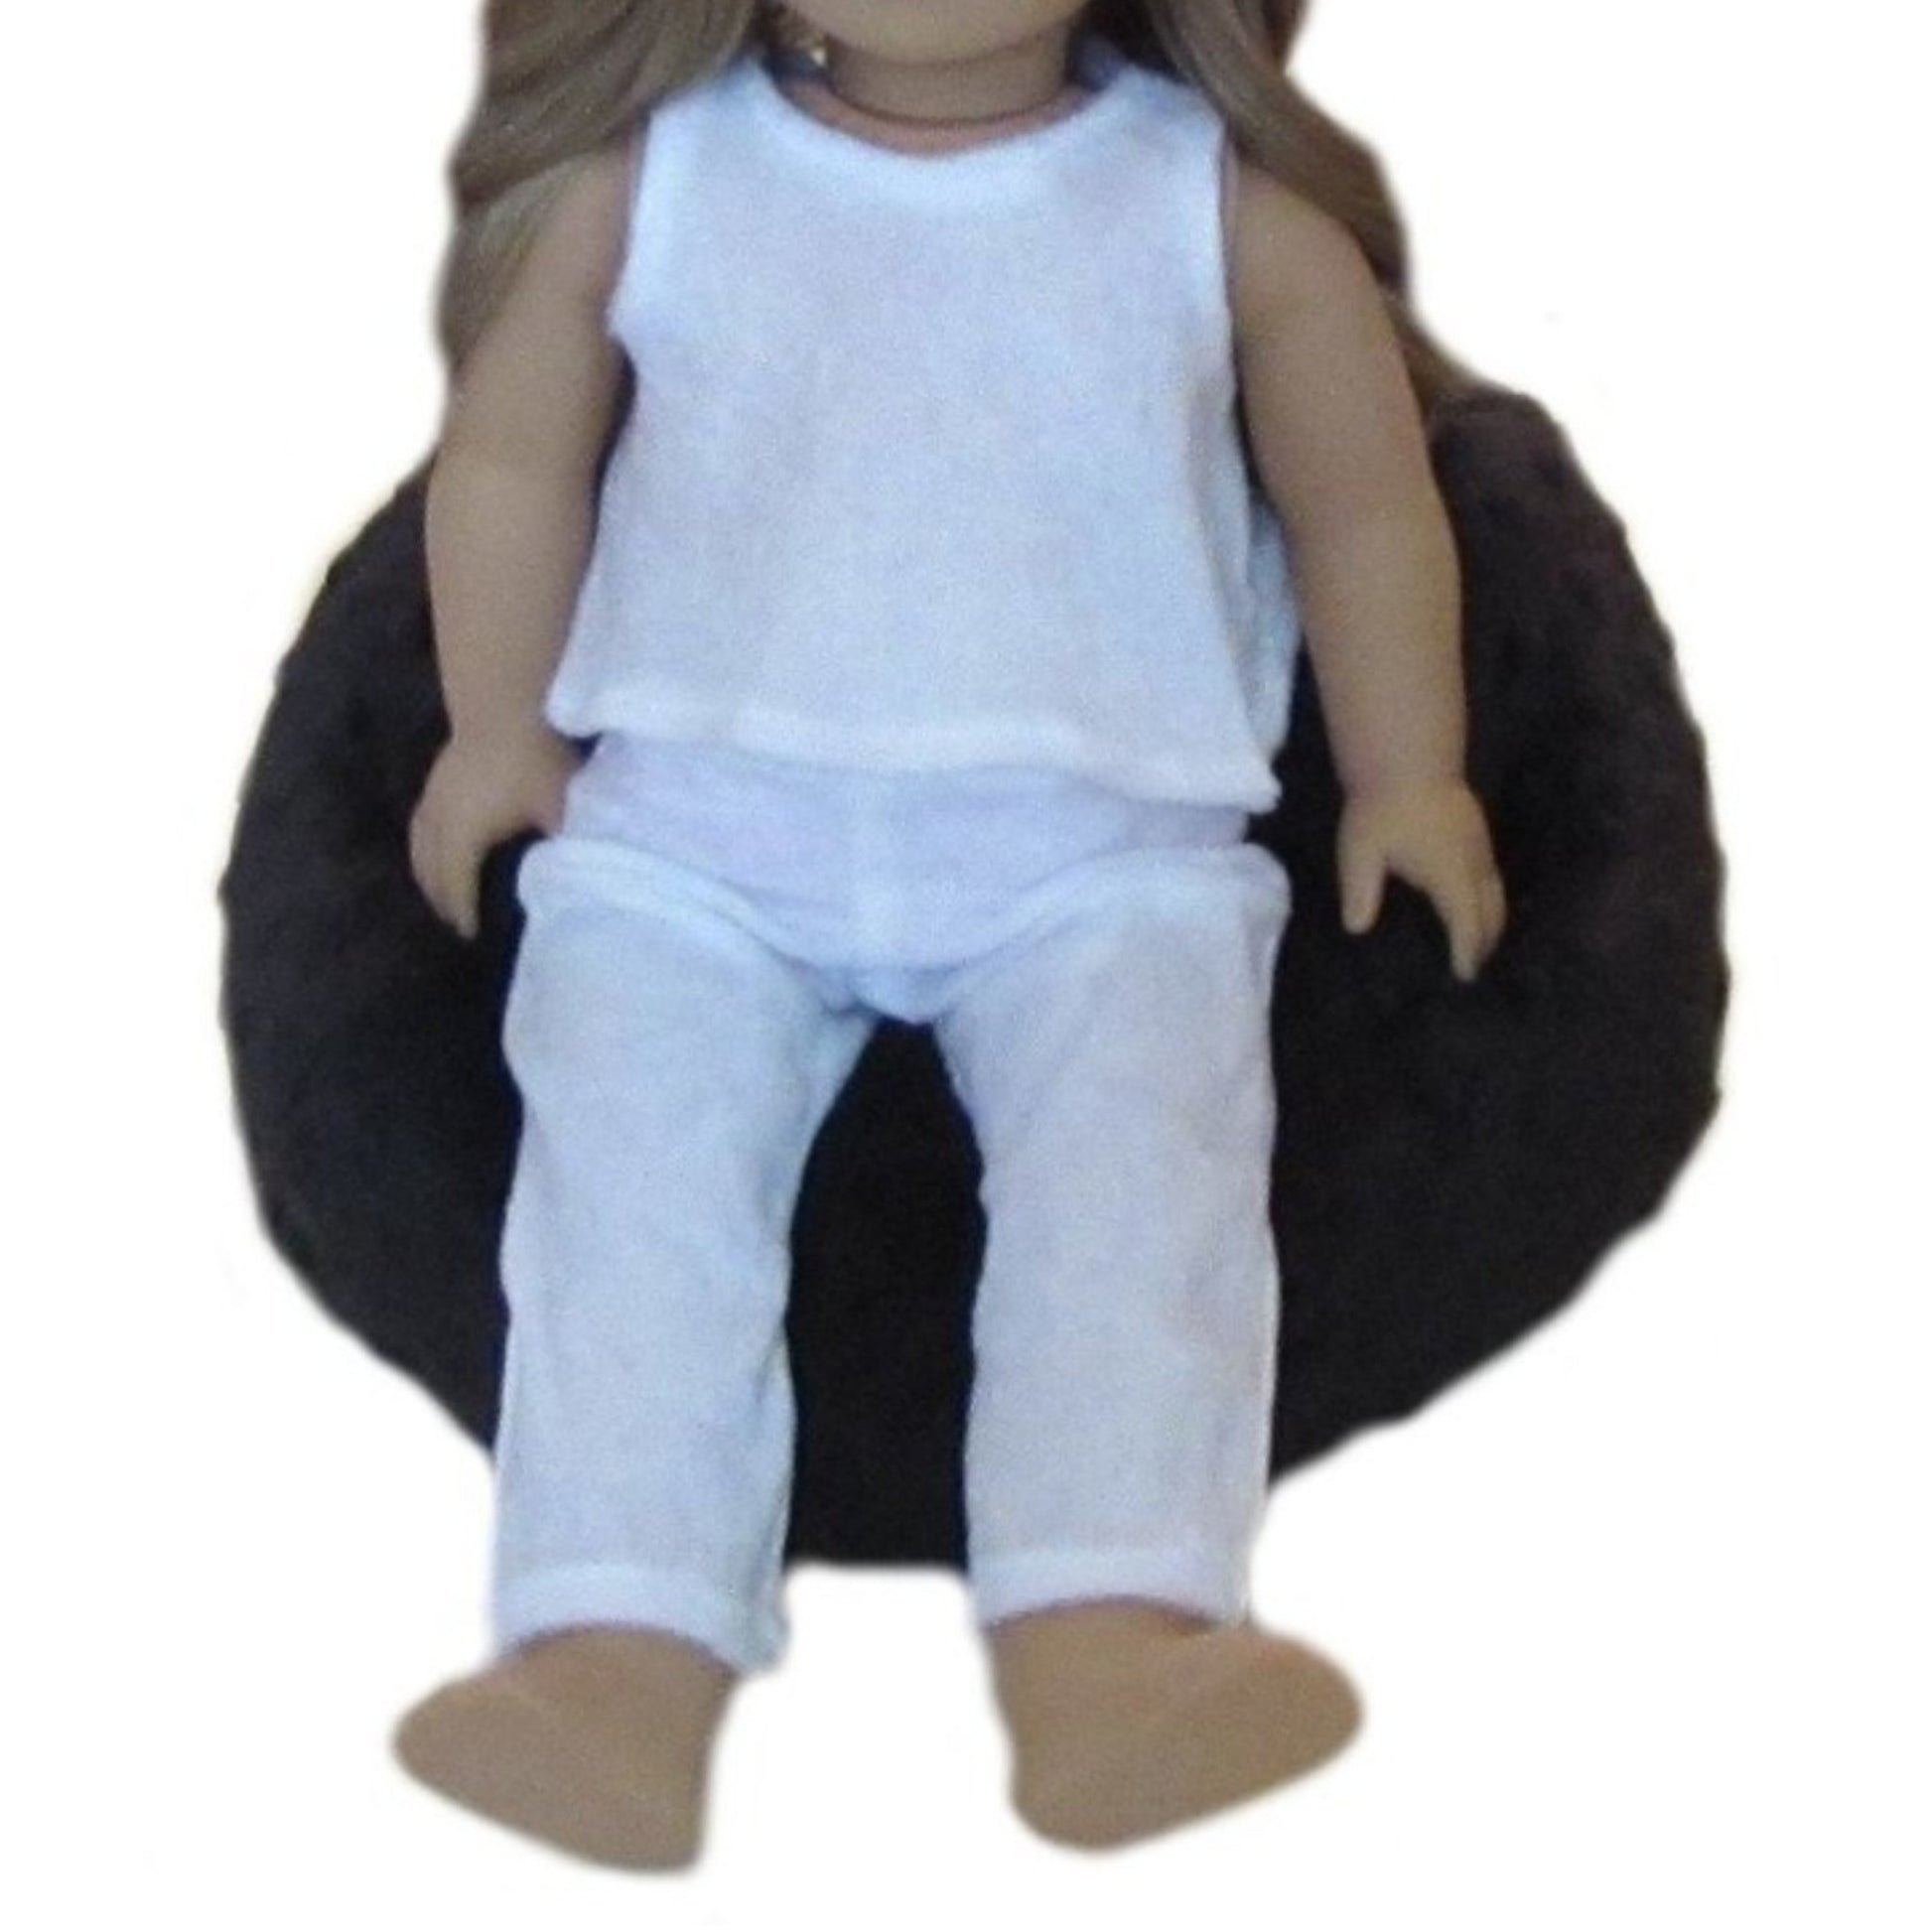 Black Minky Doll Bean Bag Chair for 18-inch dolls with doll